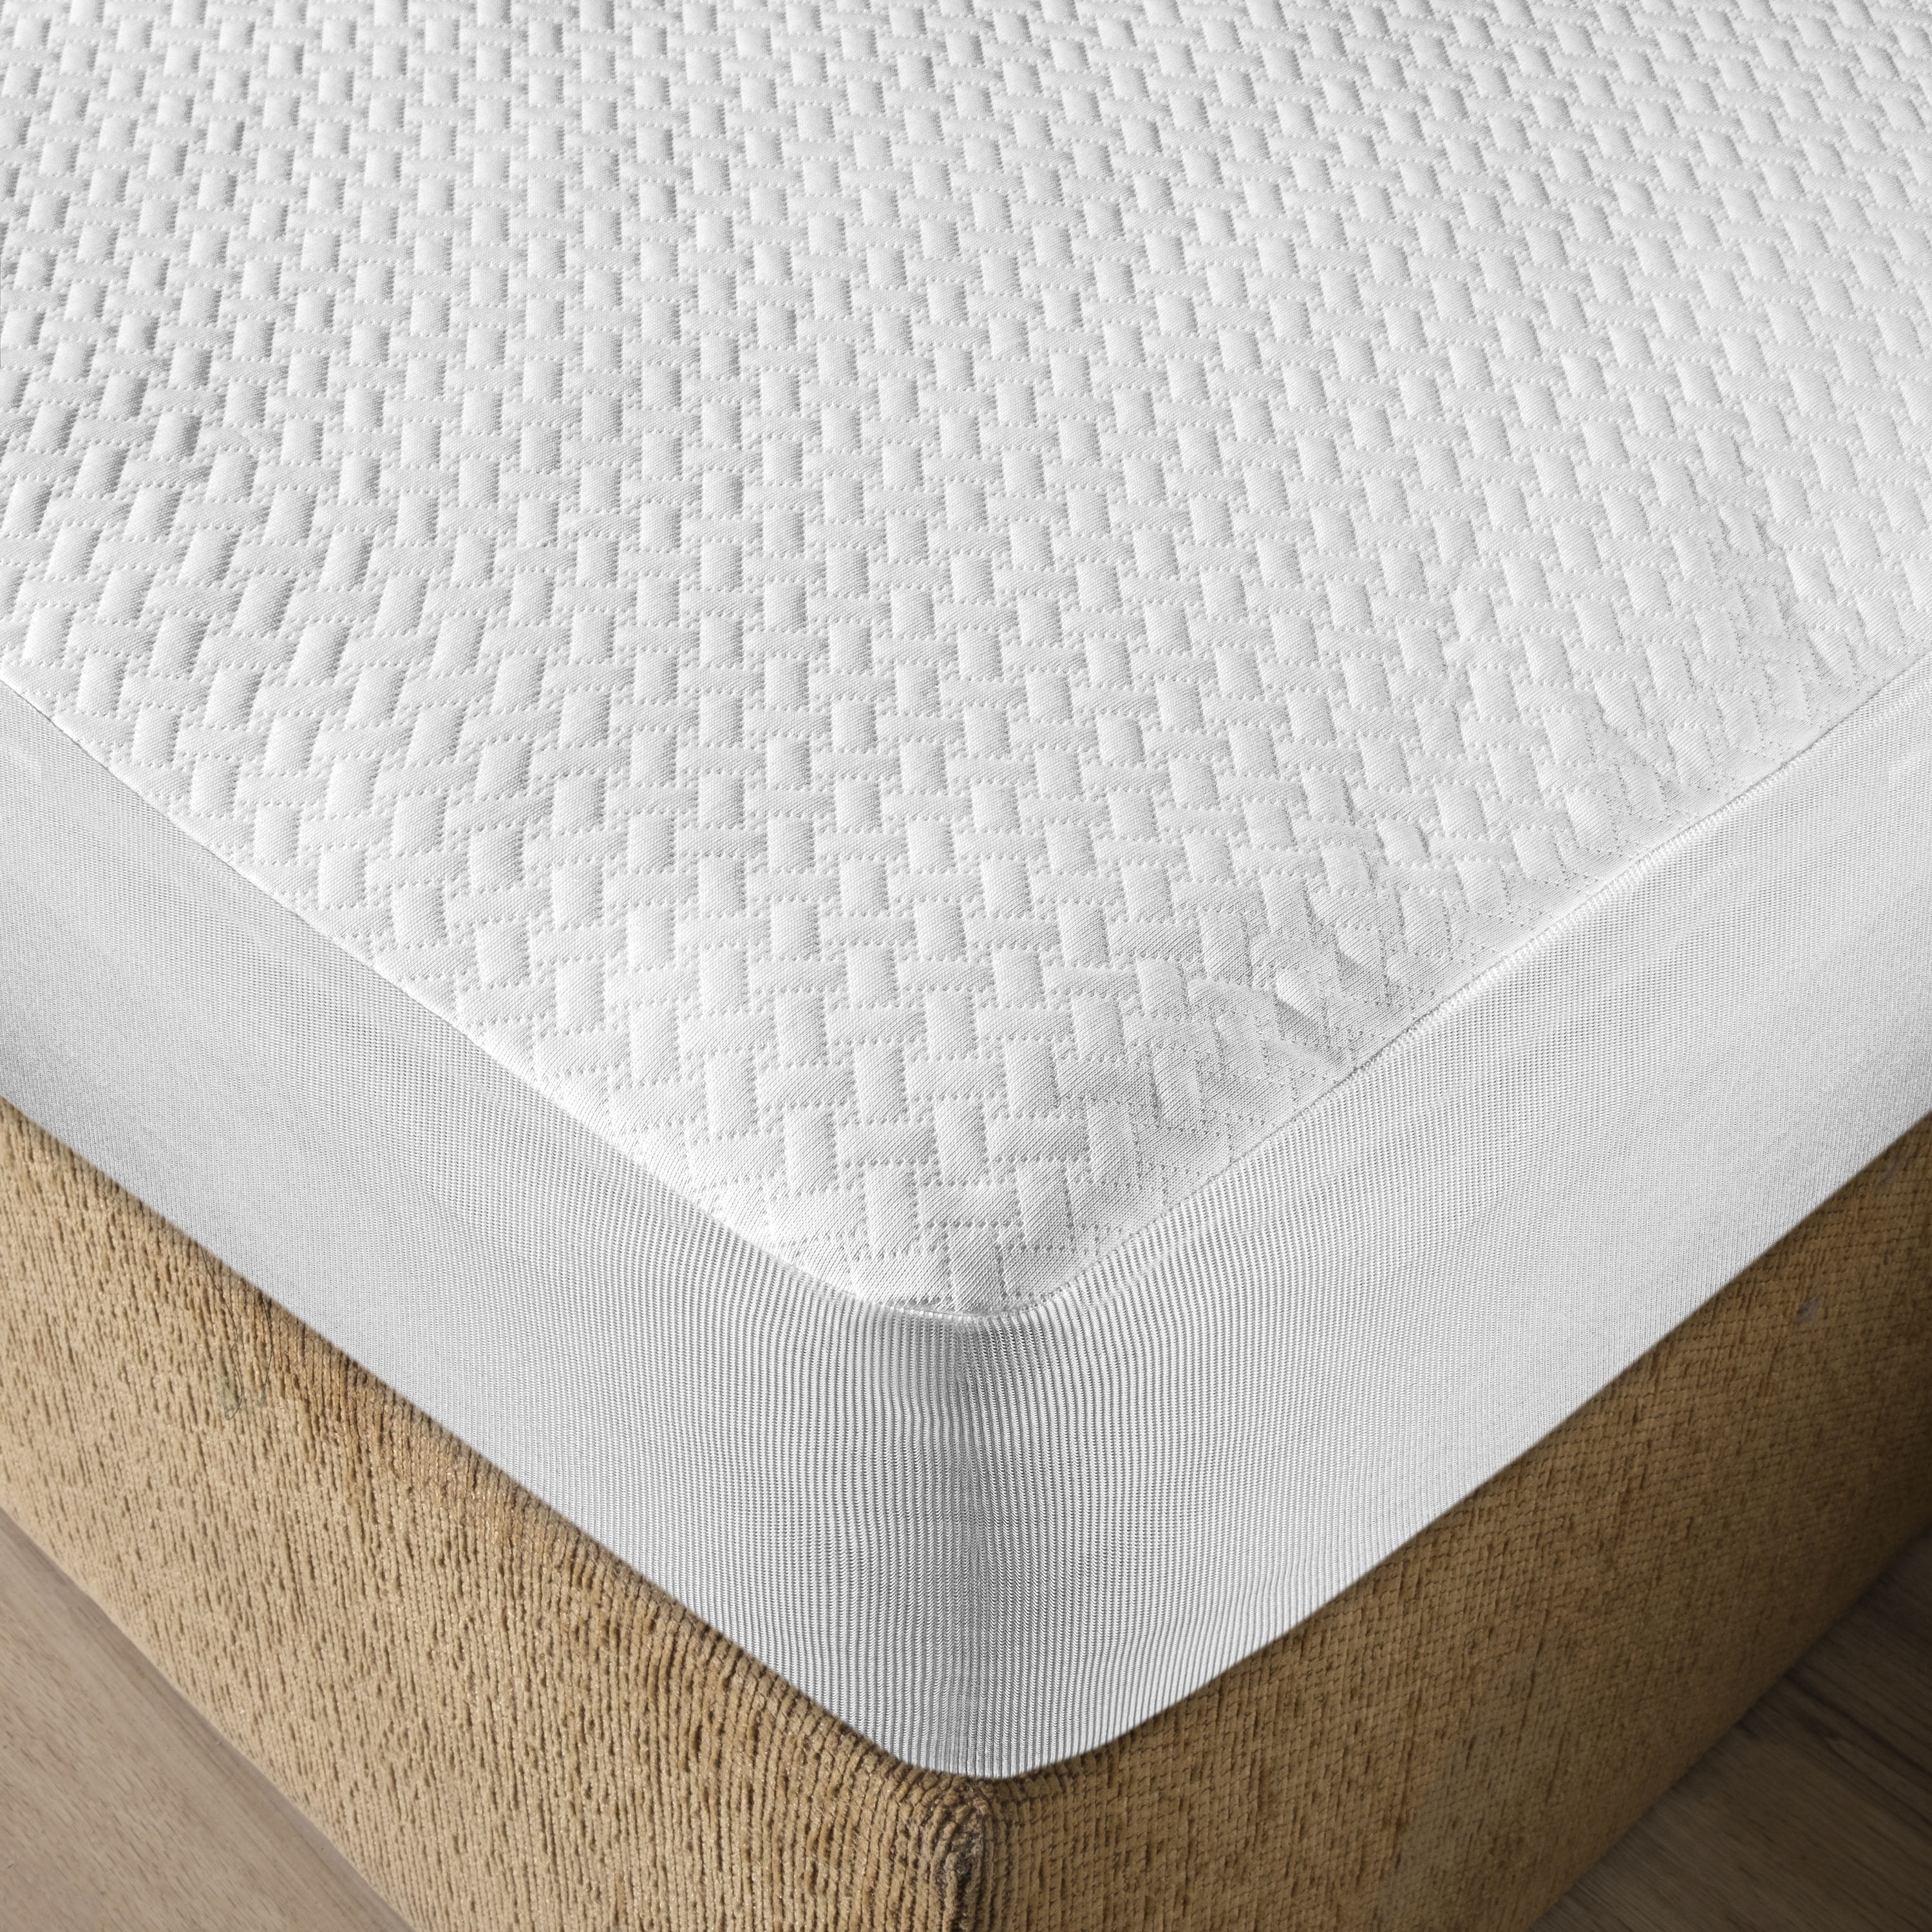 Non Waterproof Terry Towel Mattress Protector Fitted Sheet Bed Cover All Sizes 